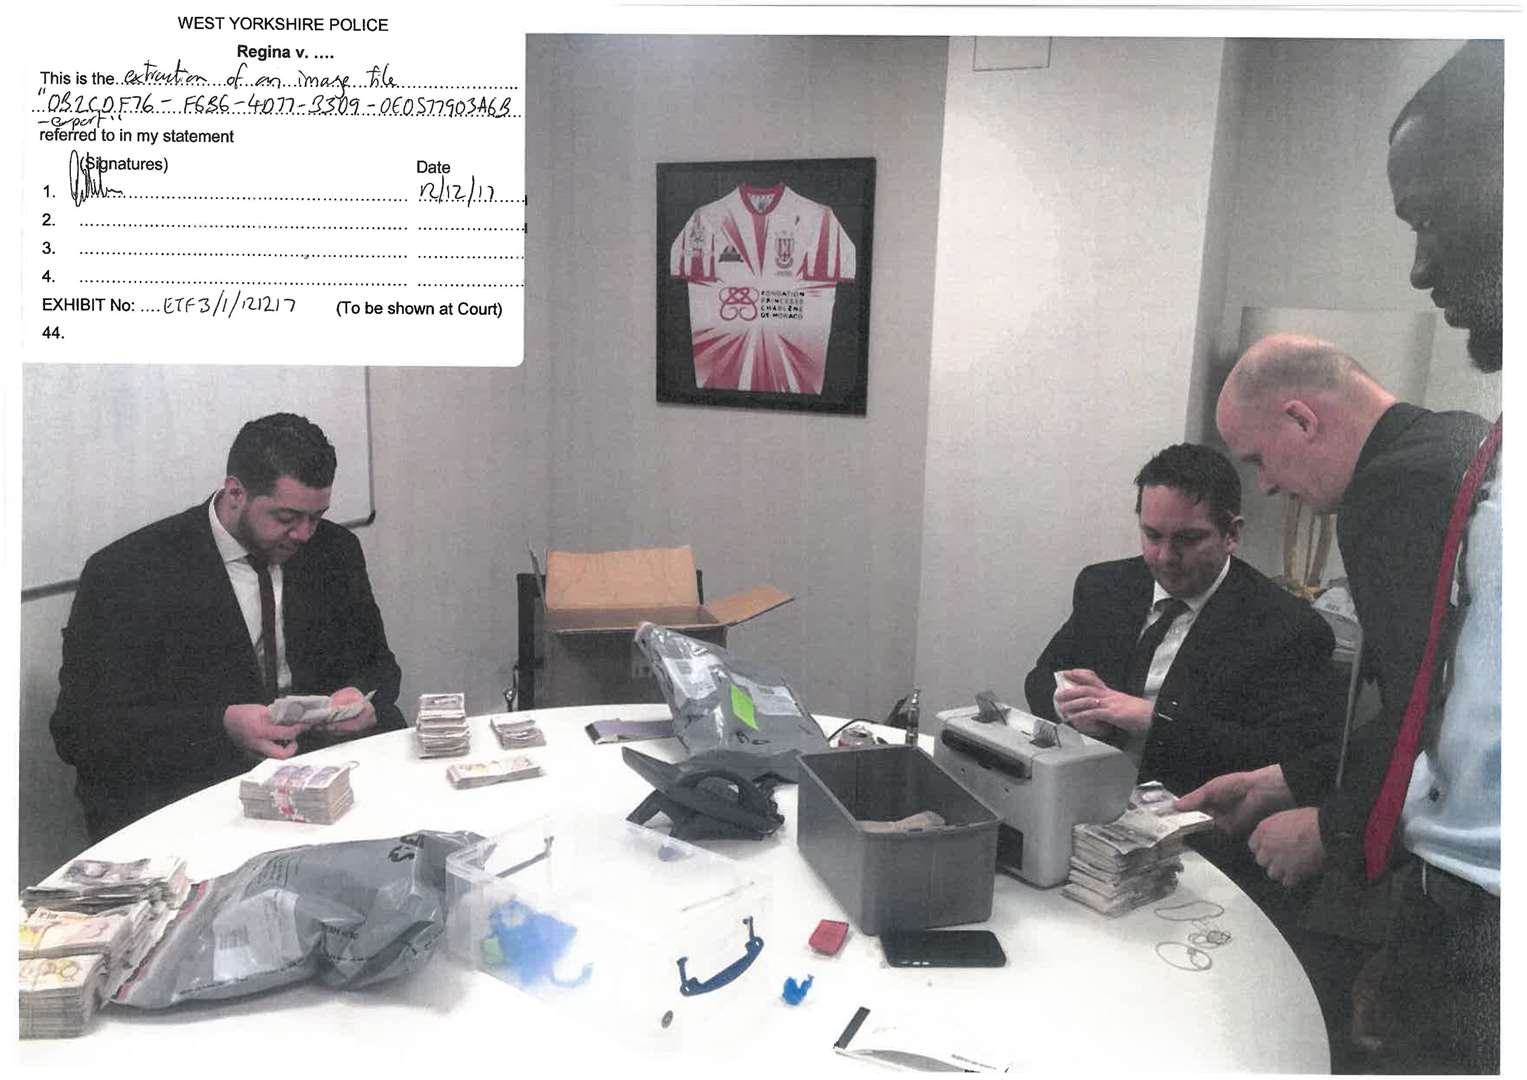 Jurors have heard that James Stunt’s late sibling Lee Stunt (pictured right, seated) was involved in the management of Stunt and Co – the business prosecutors allege was used to collect and count the criminal cash